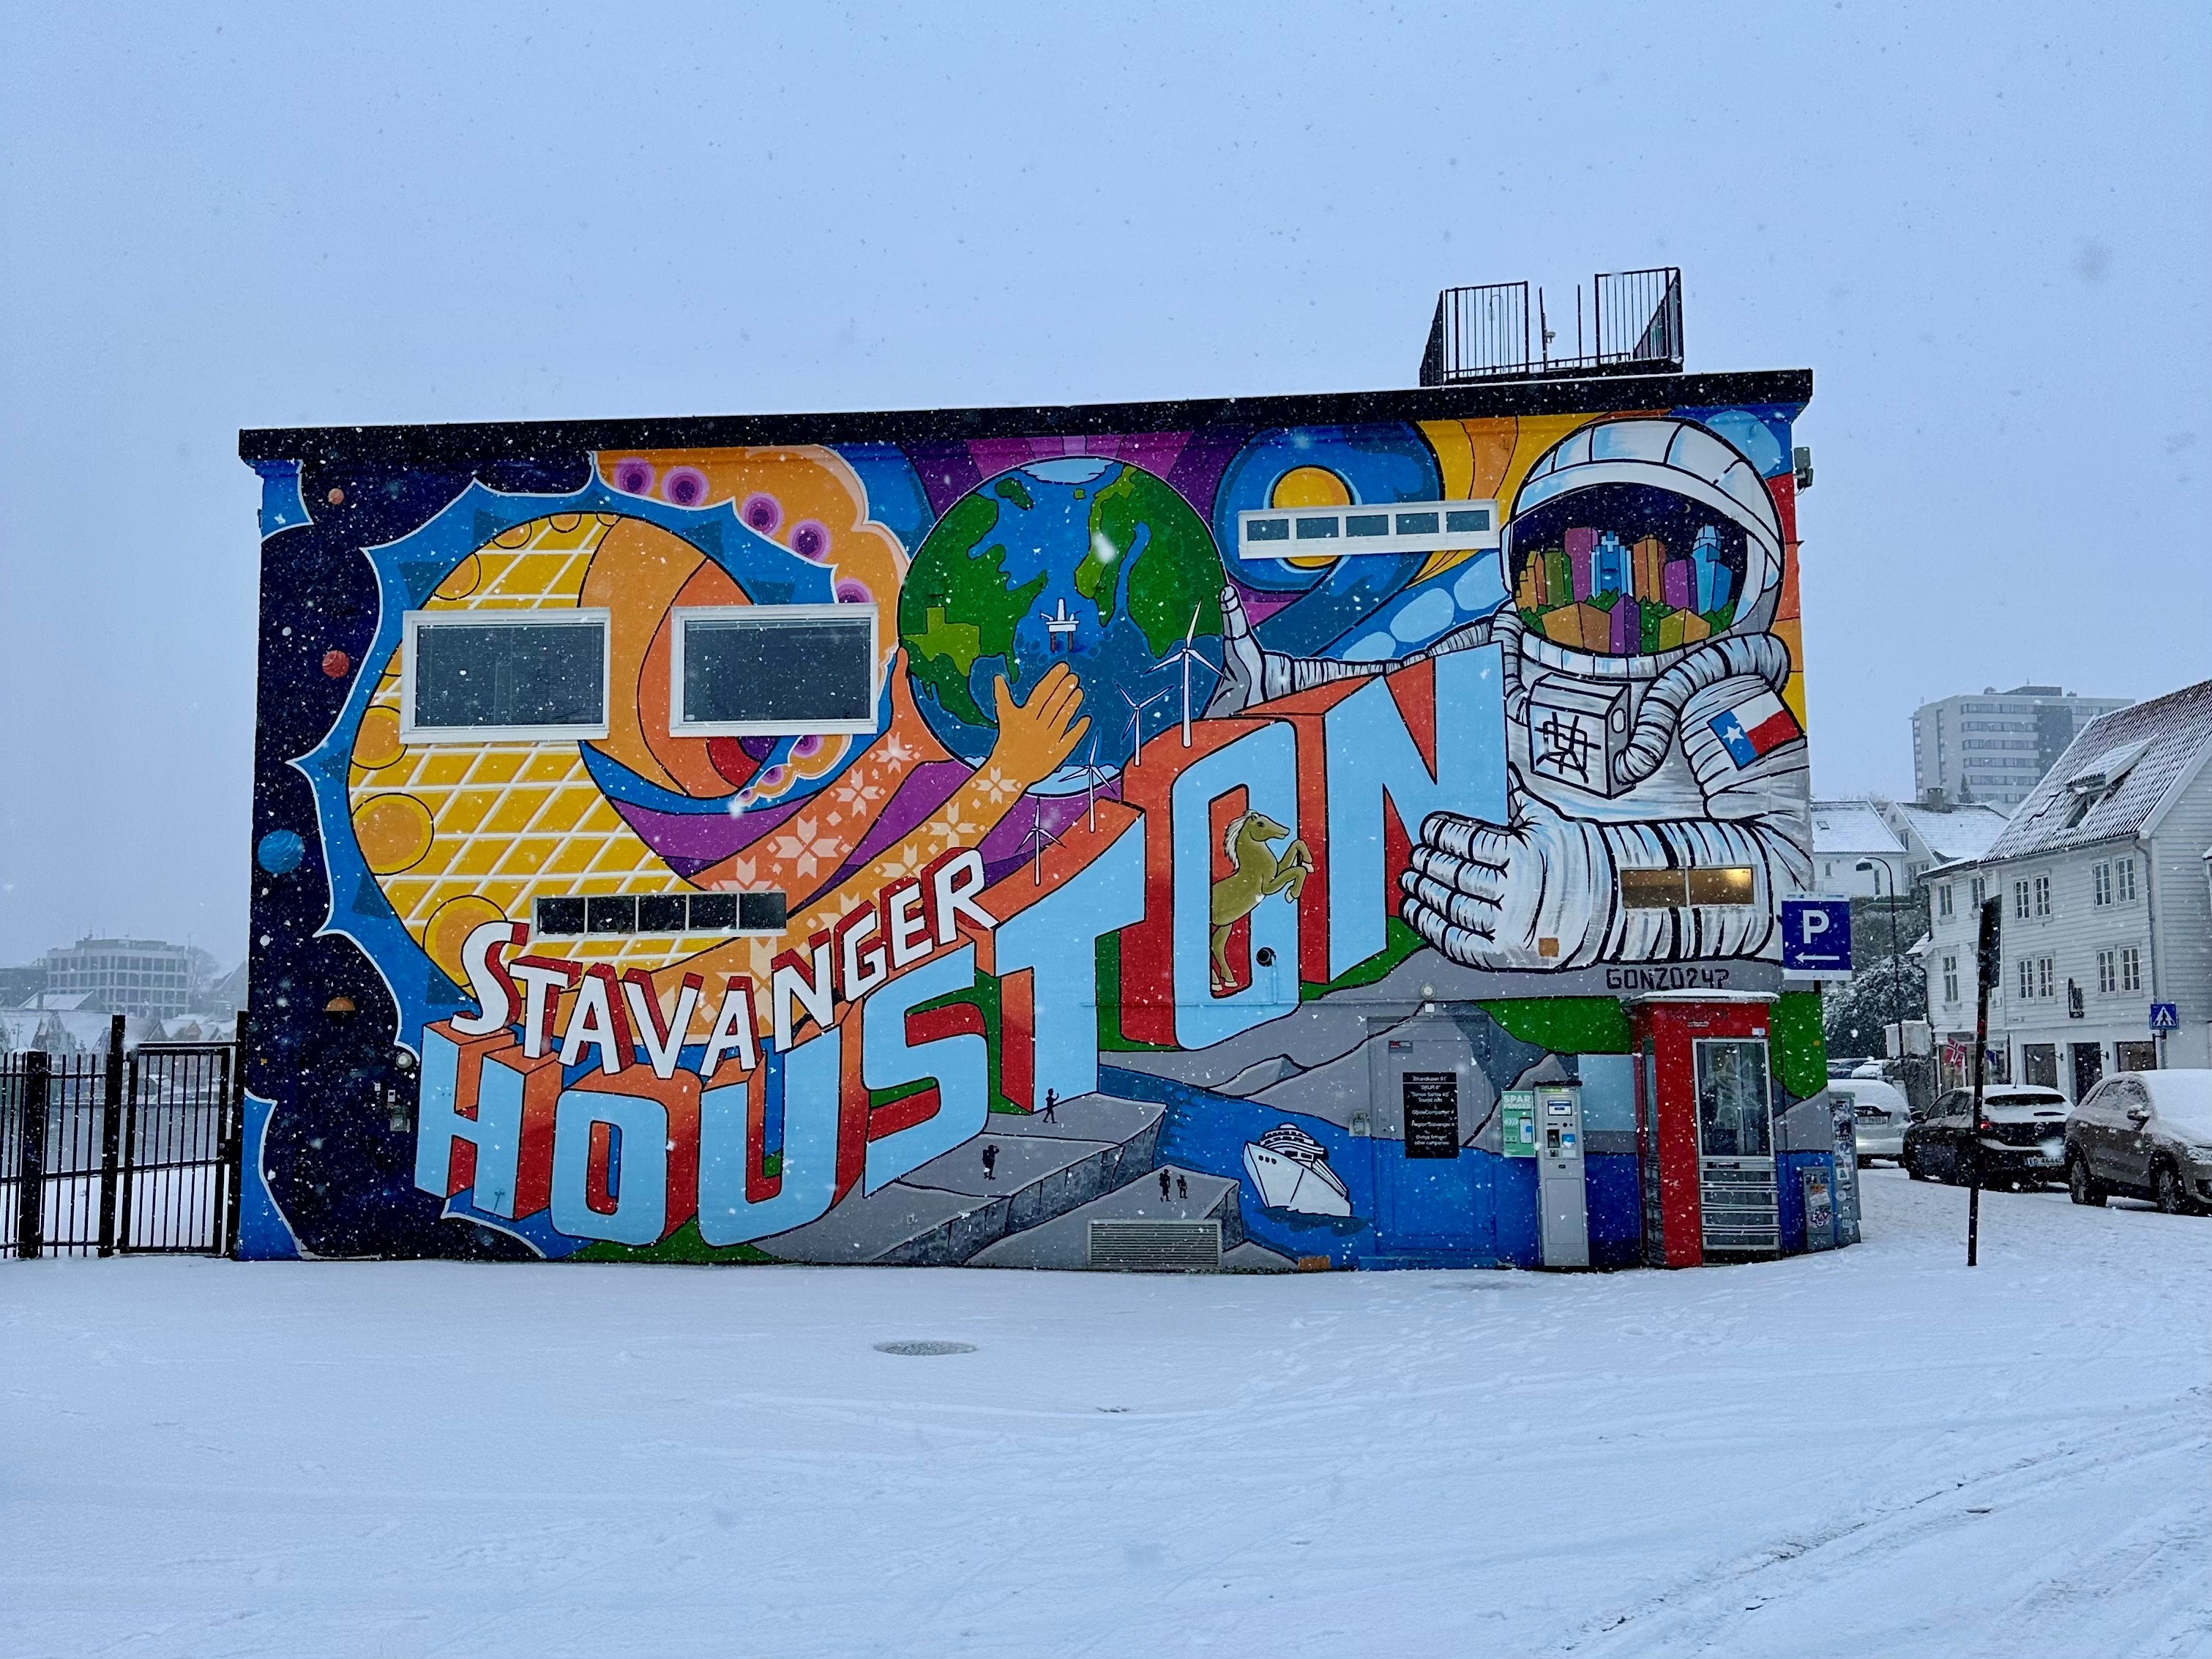 Street art in Stavanger depicting the city's connection with Houston, Texas. The street art shows a variety of themes including space travel, oil and shipping